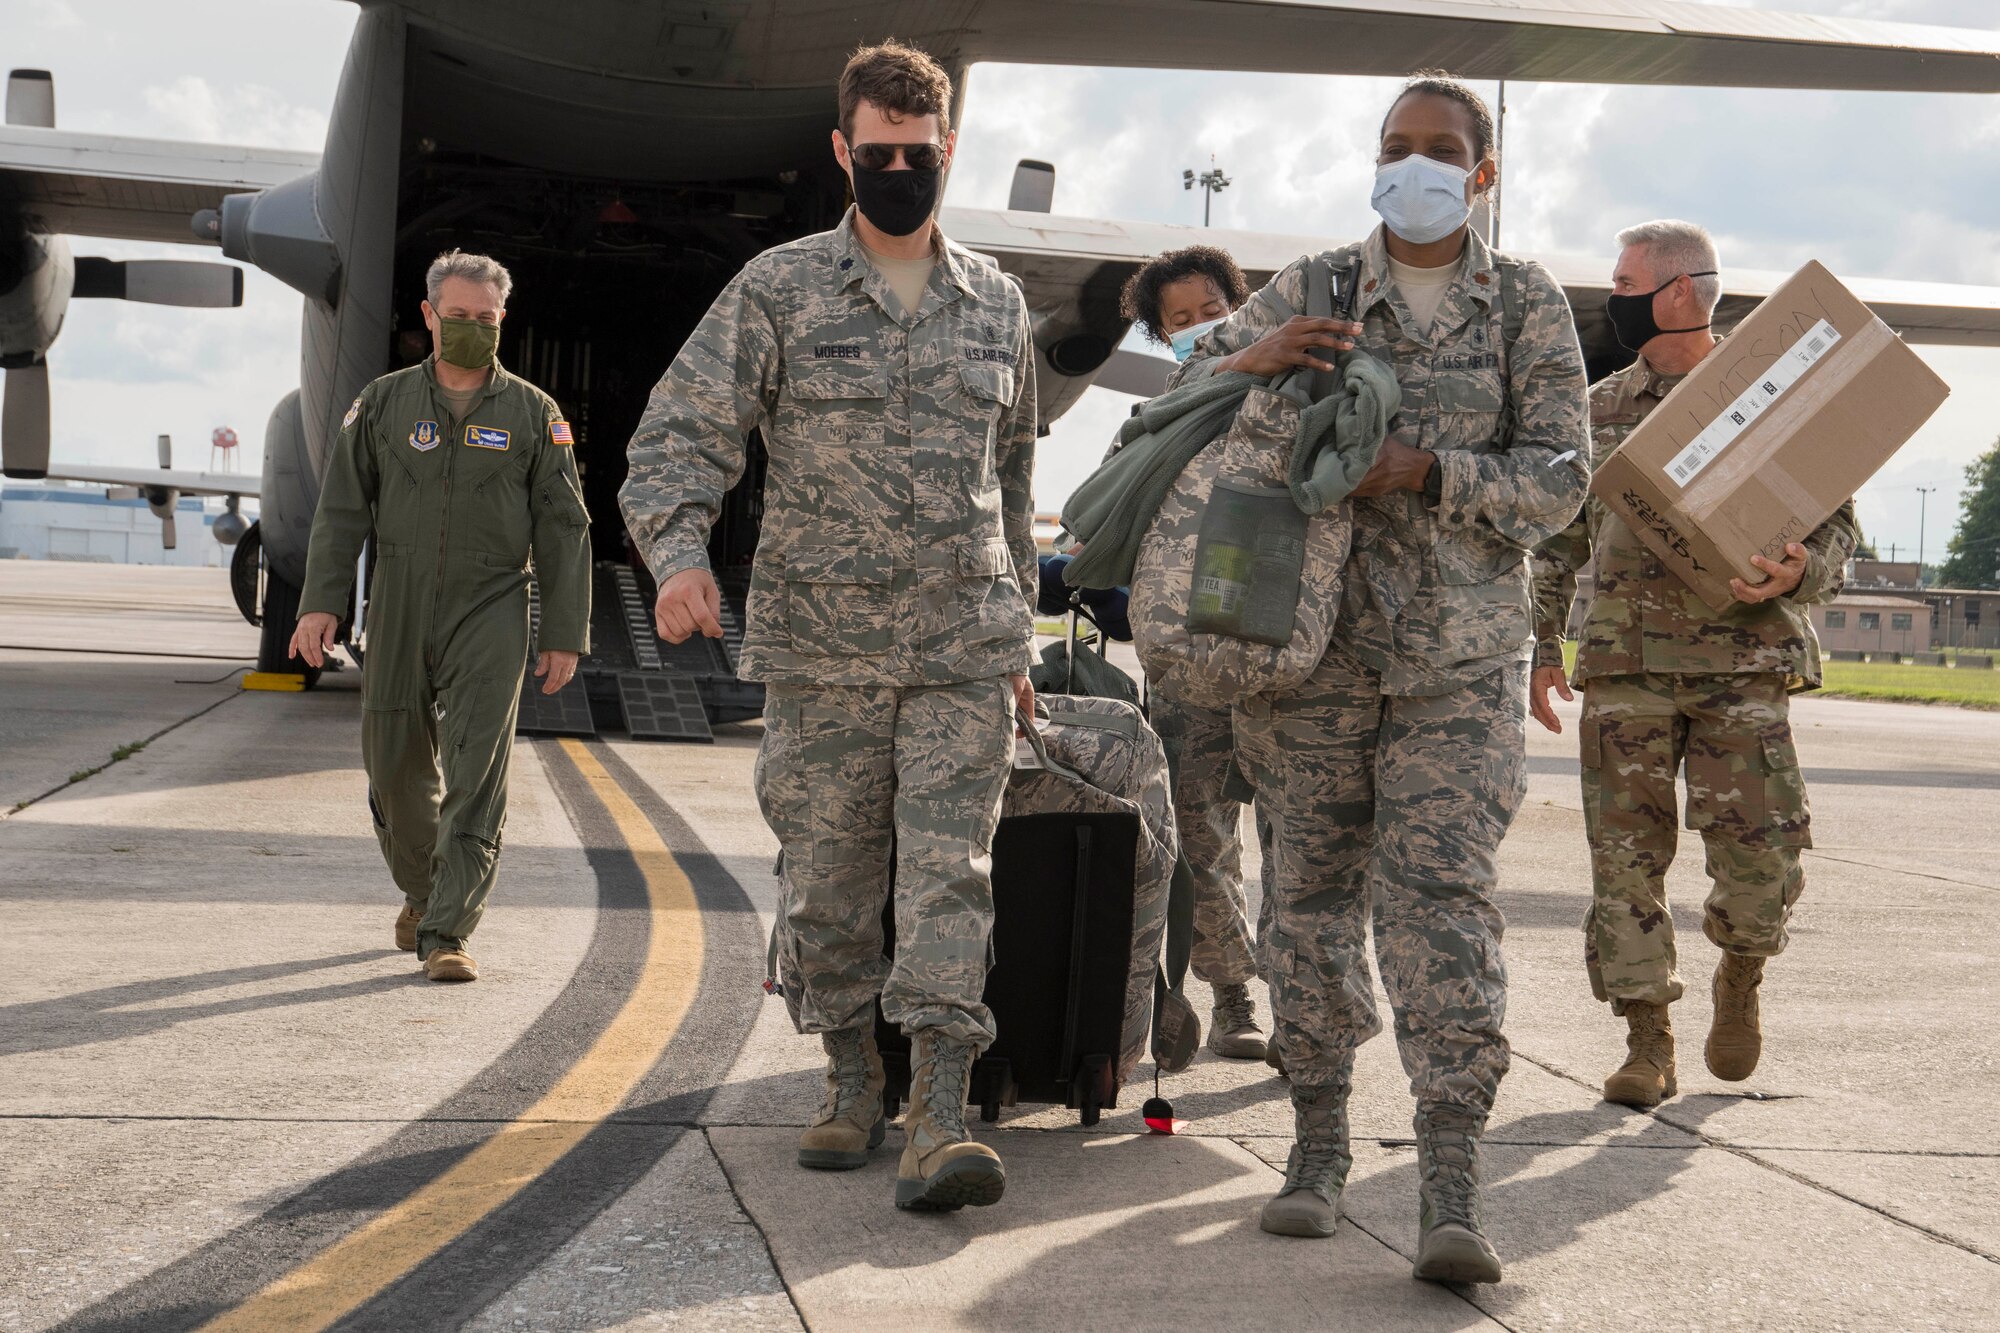 Nurses from the 94th Aeromedical Staging Squadron and members of the greeting party, including Col. Craig McPike, 94th Airlift Wing commander, left, depart a C-130H3 Hercules on the flightline at Dobbins Air Reserve Base, Ga. May 28, 2020. Four nurses from Dobbins mobilized to the COVID-19 frontlines in New York City as part of the whole-of-government response to the pandemic. (U.S. Air Force photo/Andrew Park)